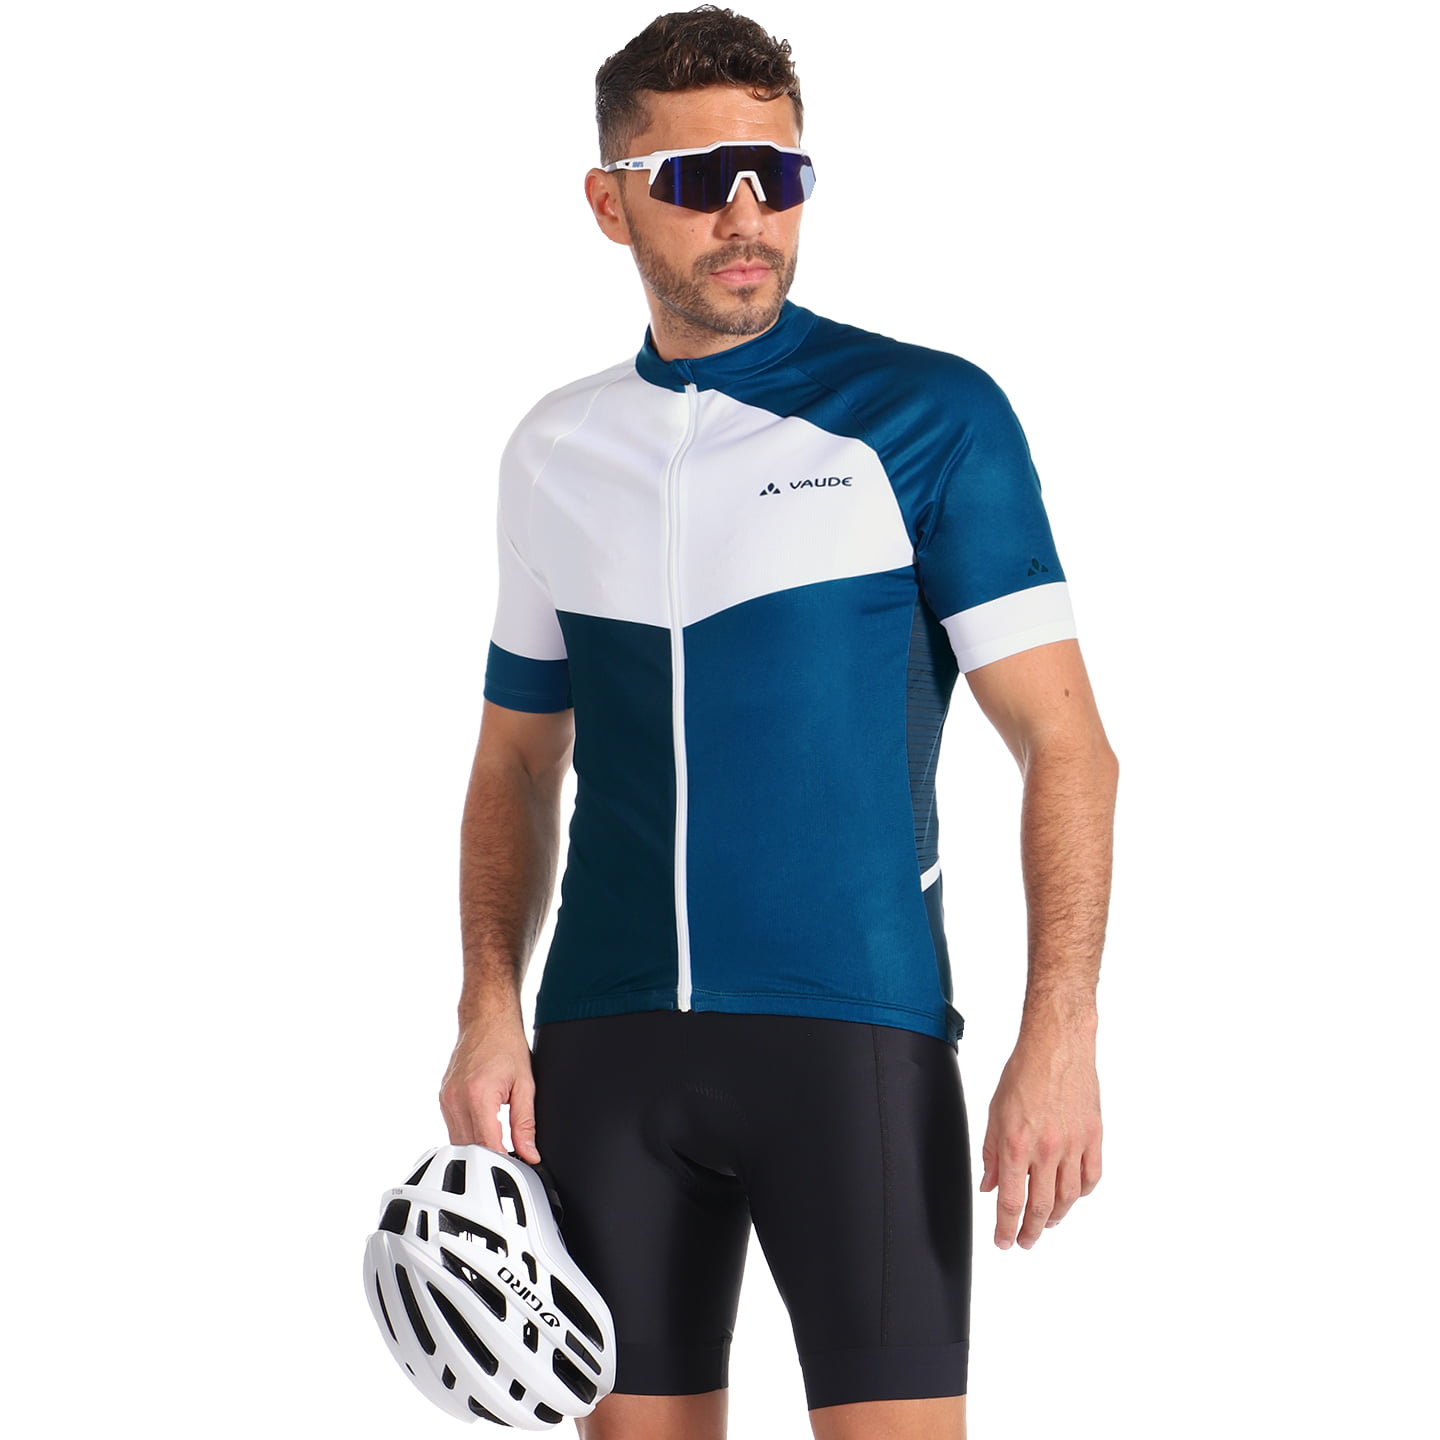 VAUDE Posta FZ Short Sleeve Jersey, for men, size 2XL, Cycling jersey, Cycle clothing